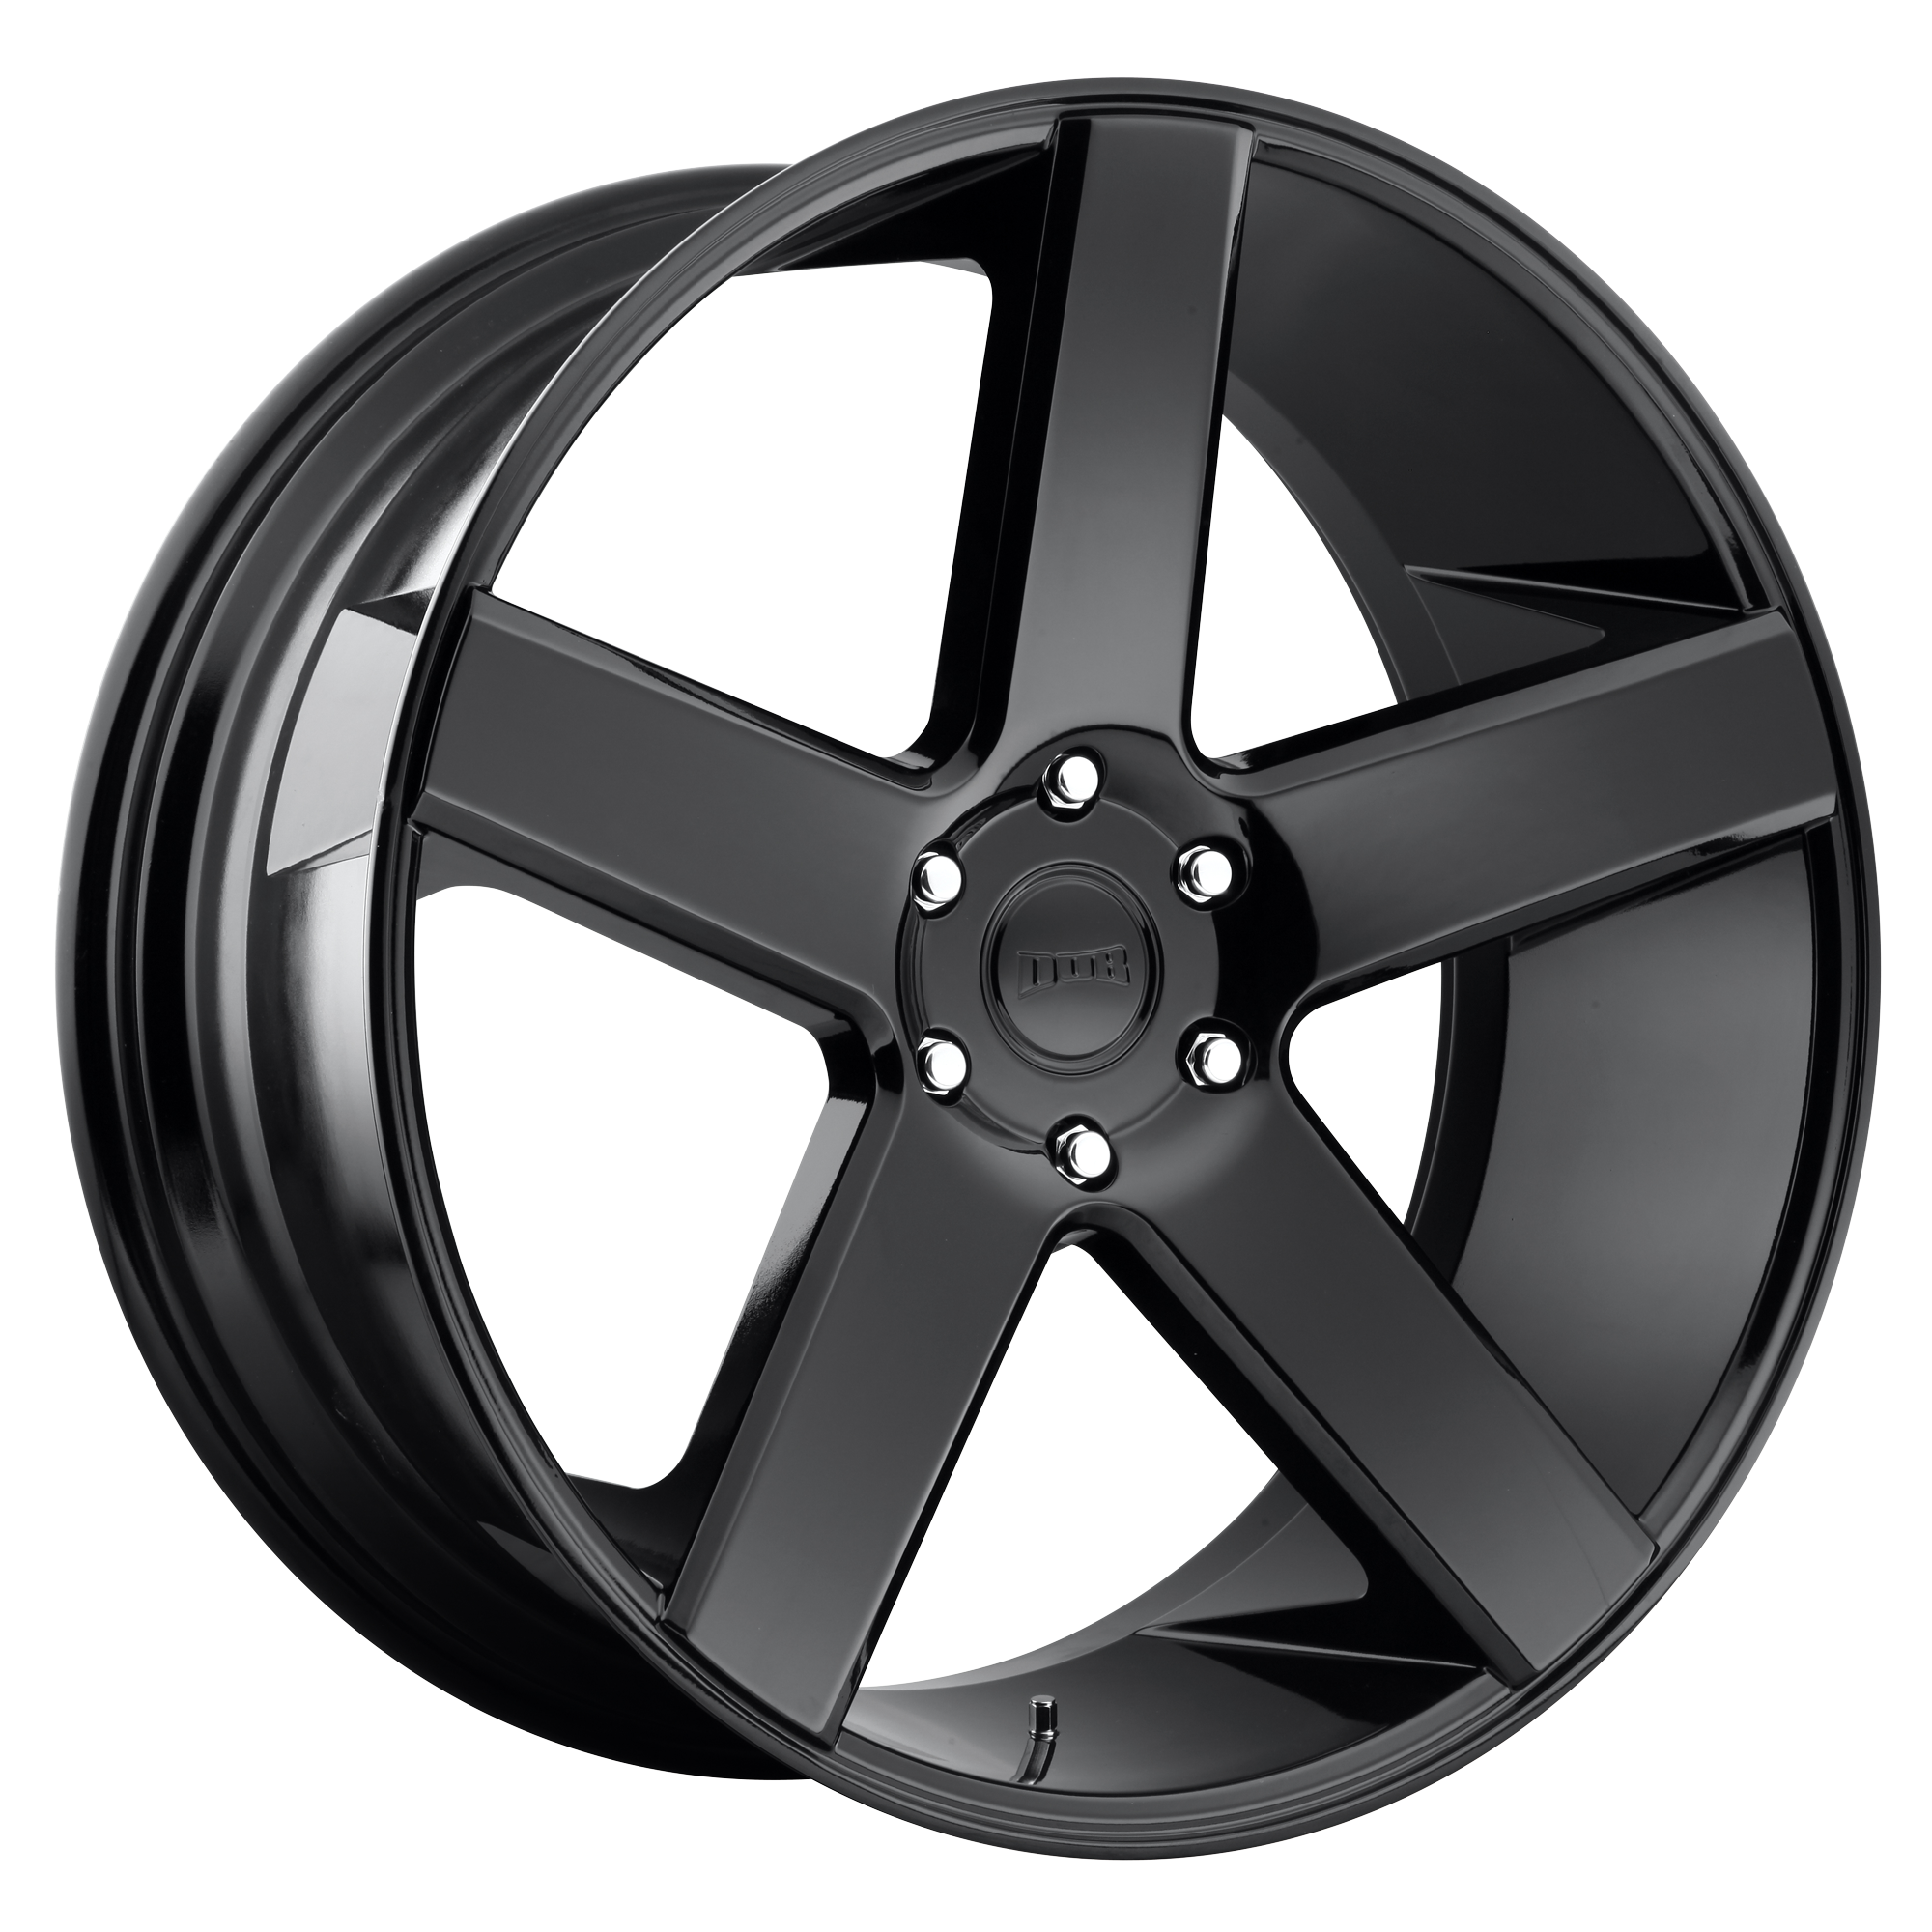 BALLER 20x9.5 5x139.70 GLOSS BLACK (25 mm) - Tires and Engine Performance